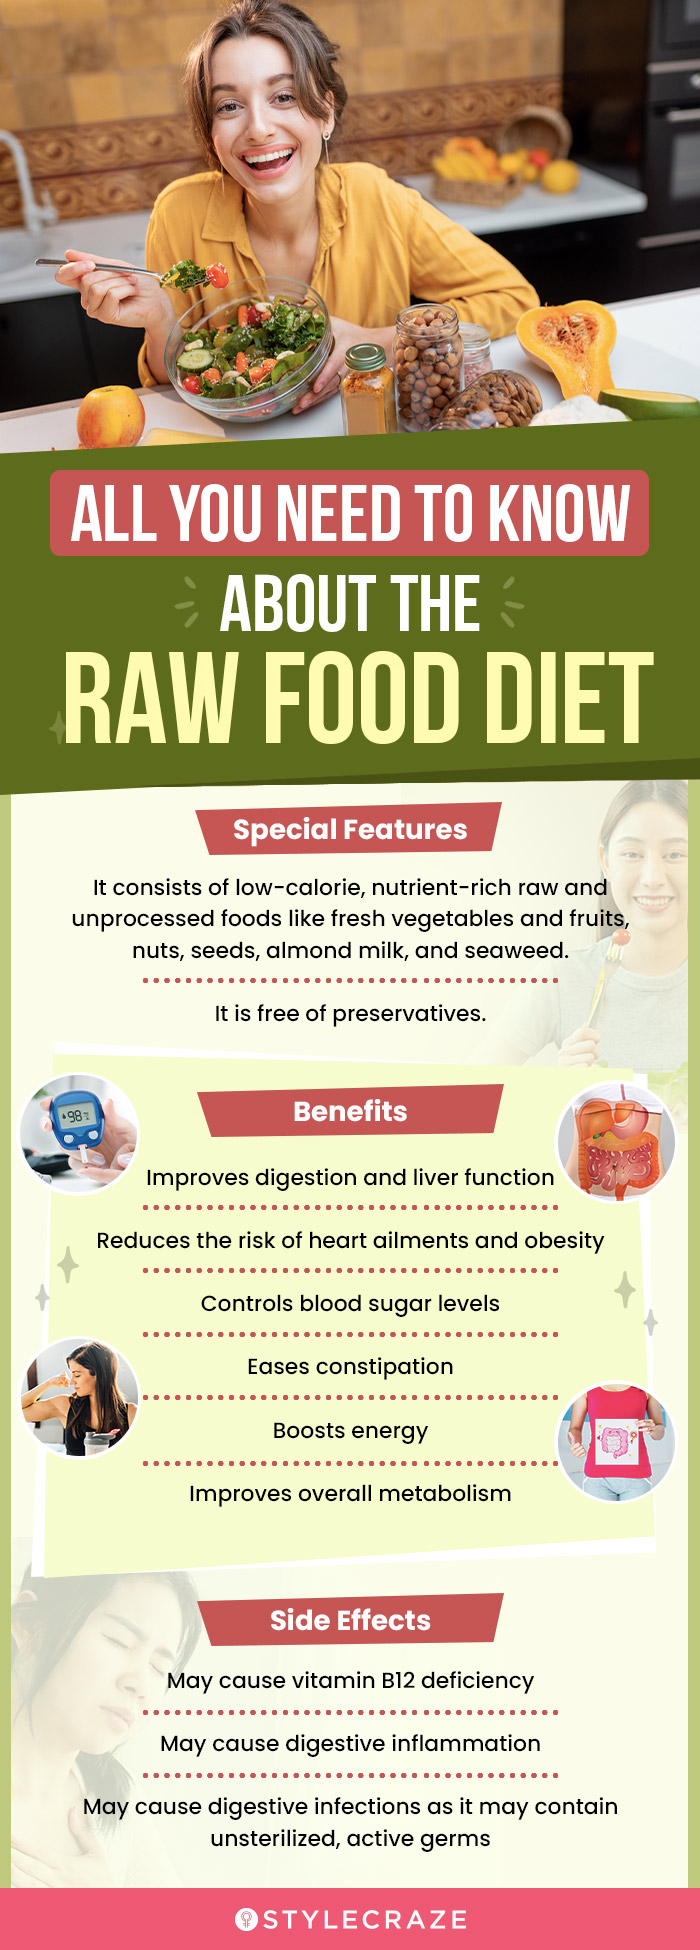 special features of the raw food diet, benefits, and side effects (infographic)